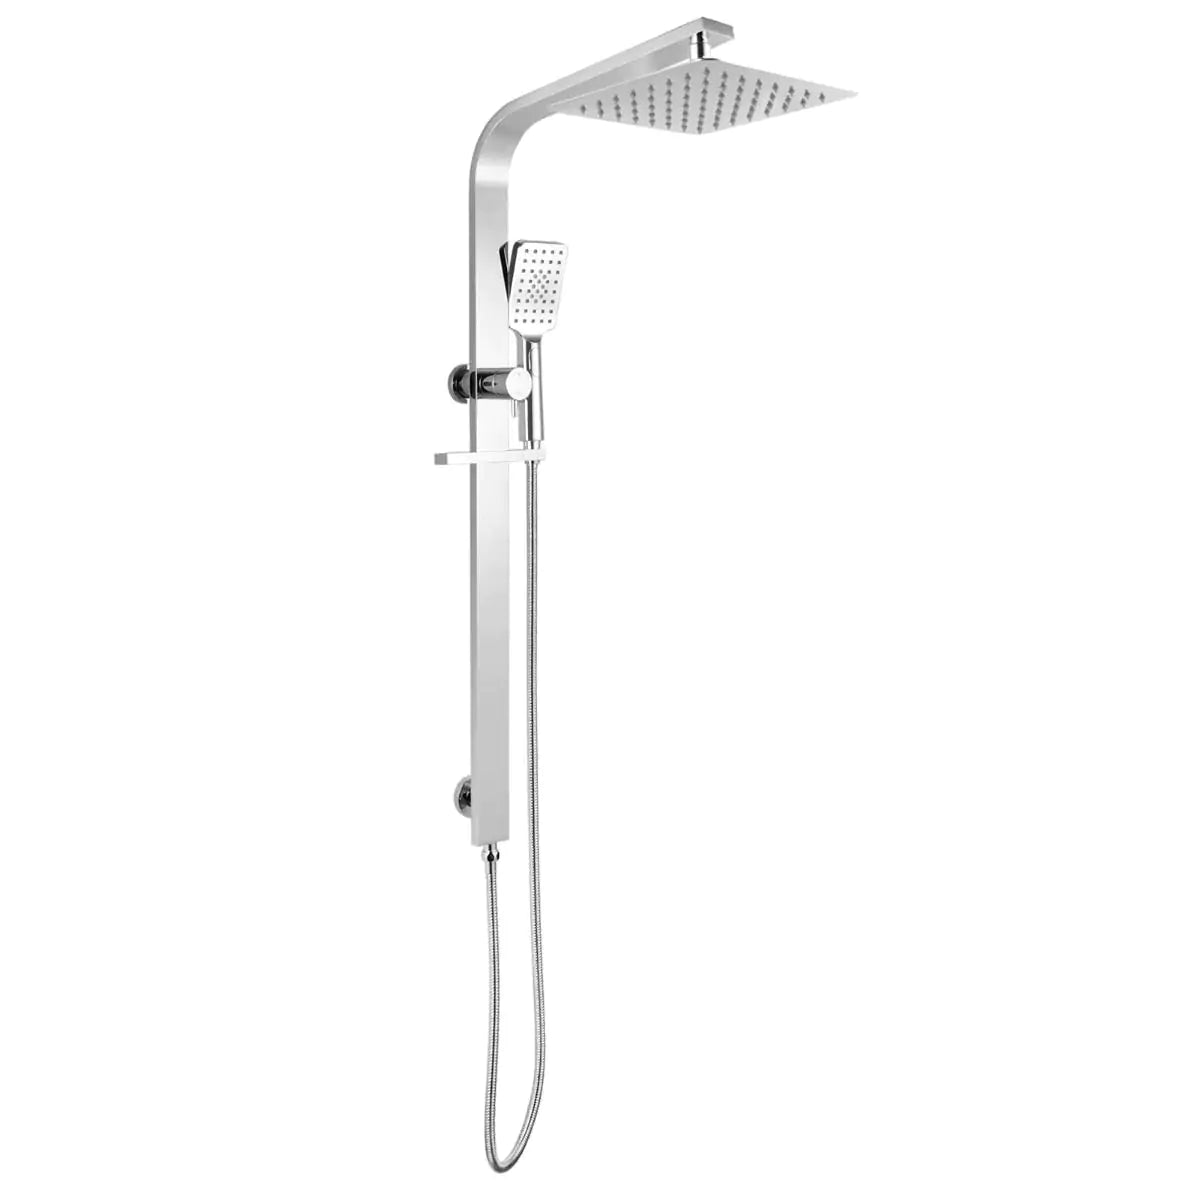 Square Wide Rail Shower Station, Top Water Inlet, 3 Functions Handheld-Chrome-CH2150-SH-N+CH0002-SH+CH-S8-HHS